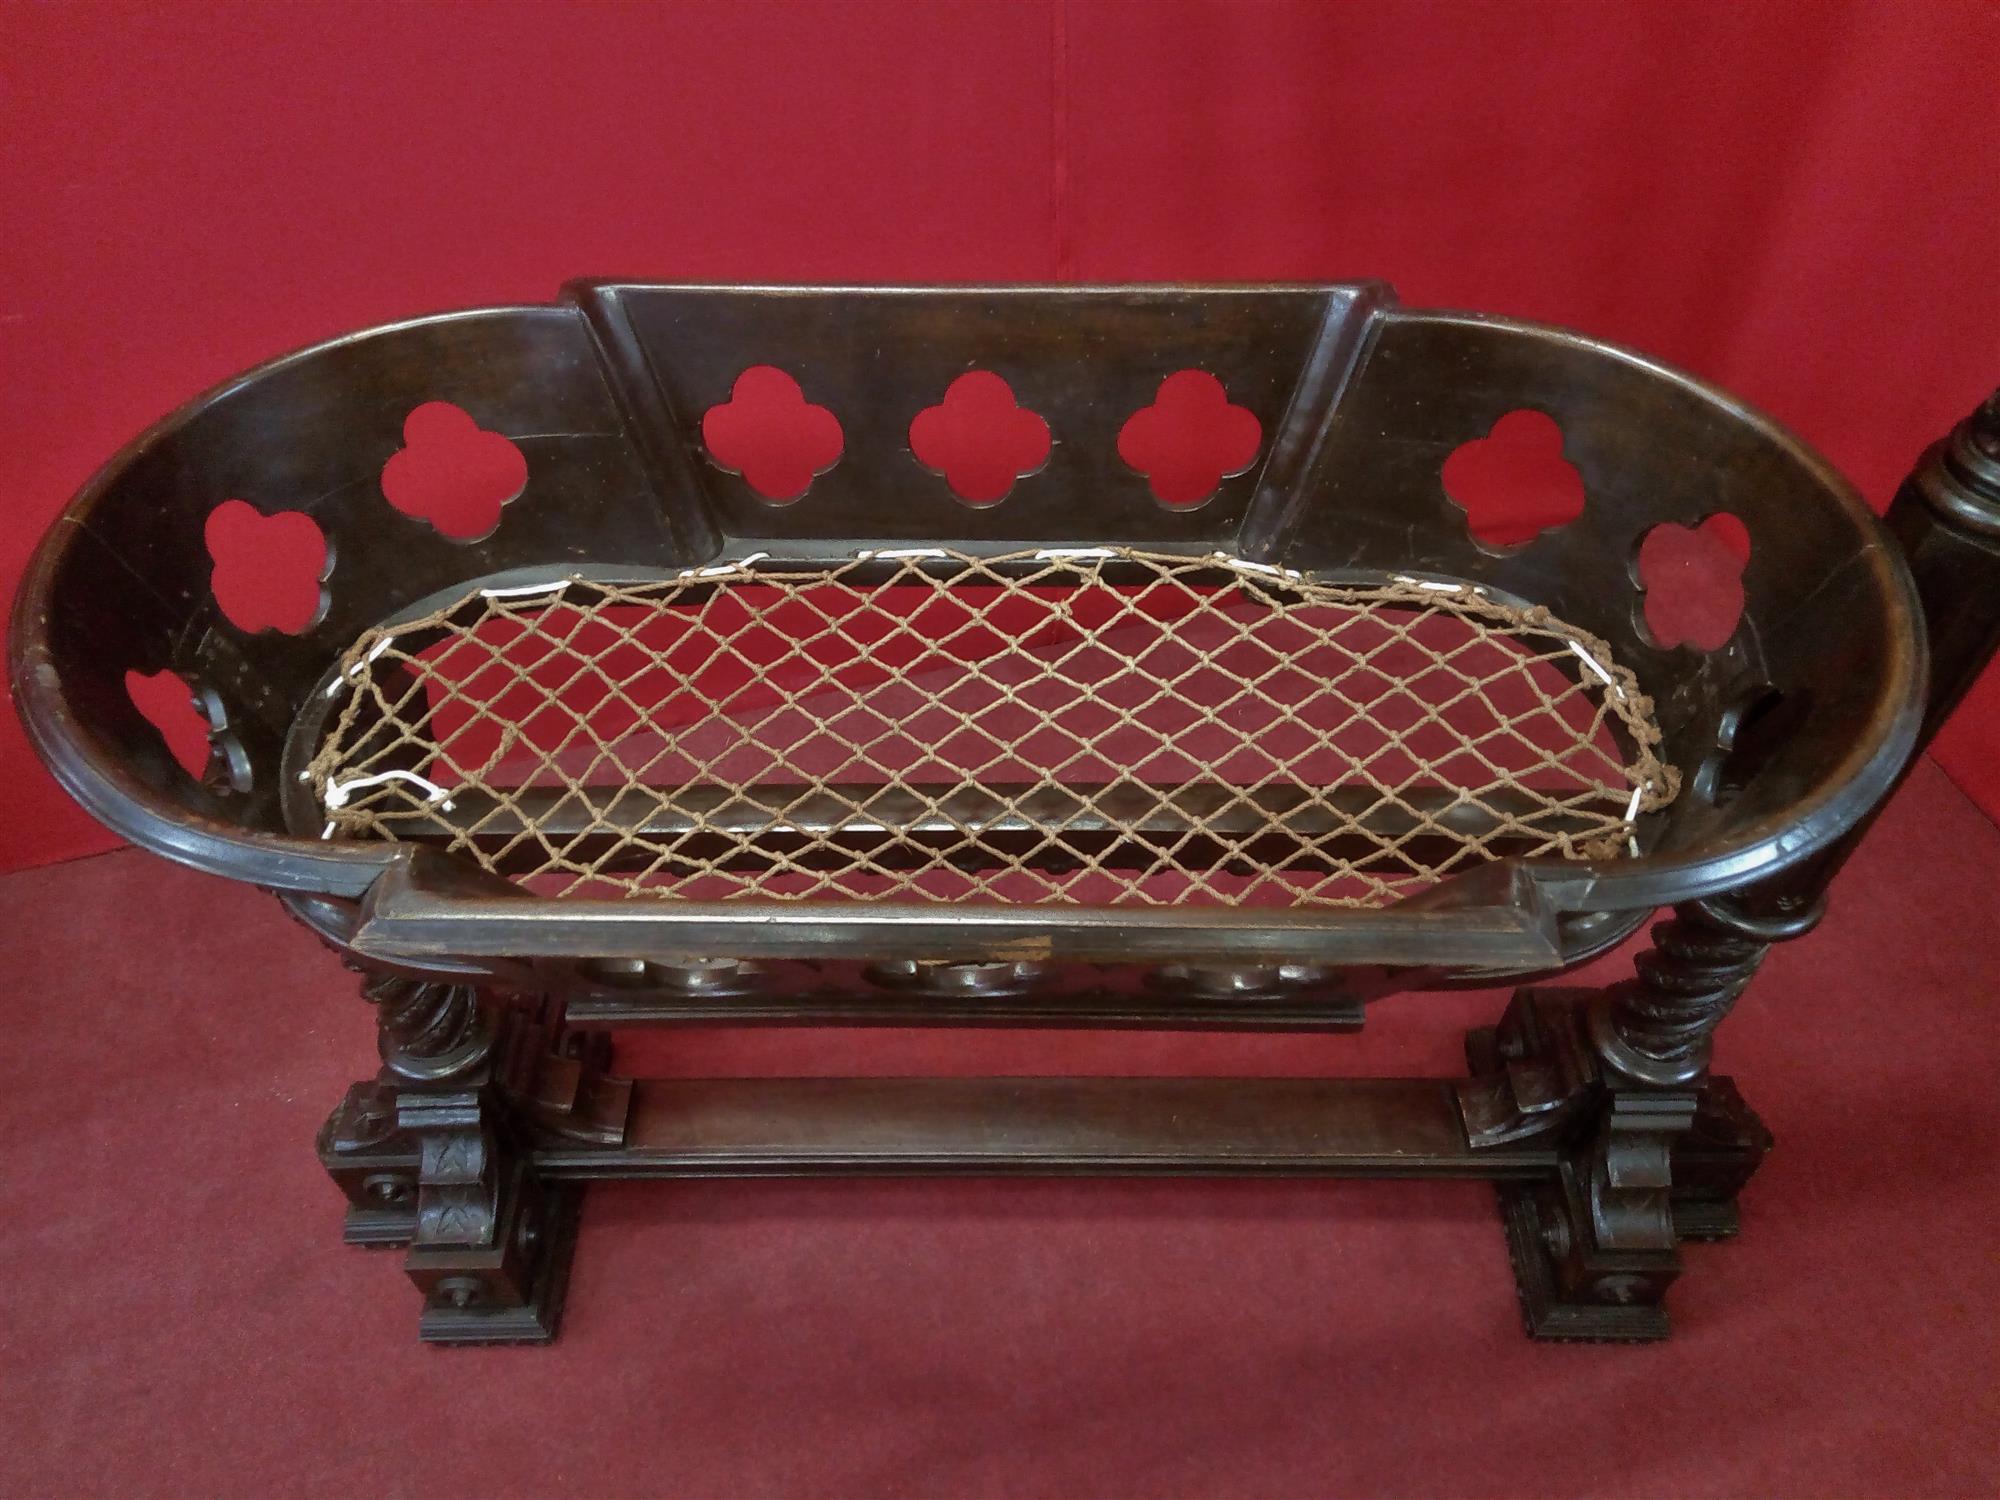 Carved baby cot